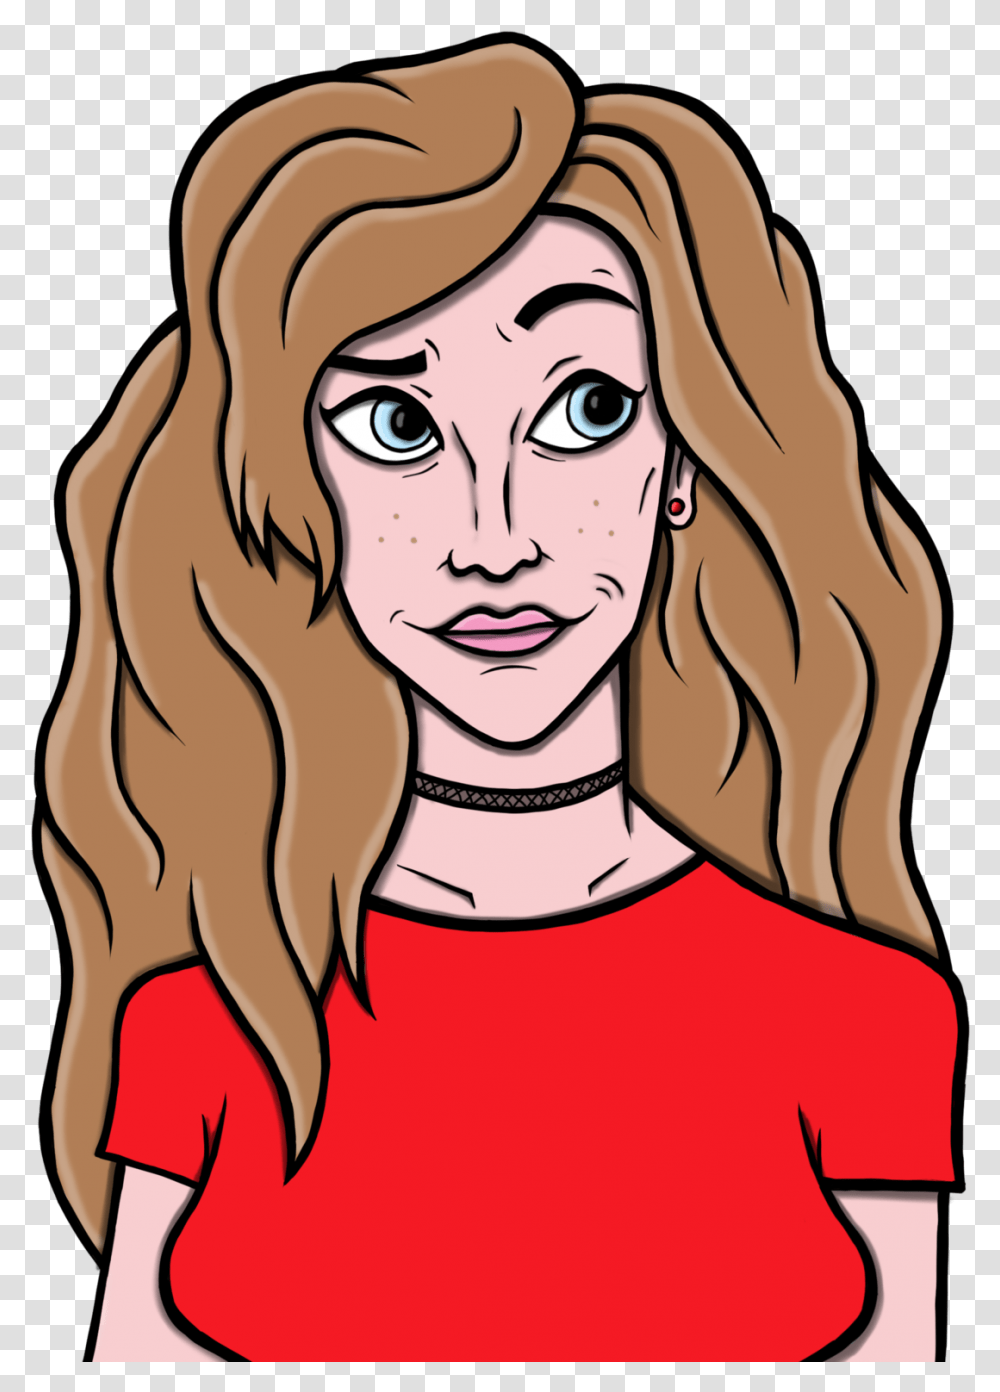 Just A Self Portrait I Did With Heavy Reference Copying Cartoon, Person, Face, Female, Drawing Transparent Png